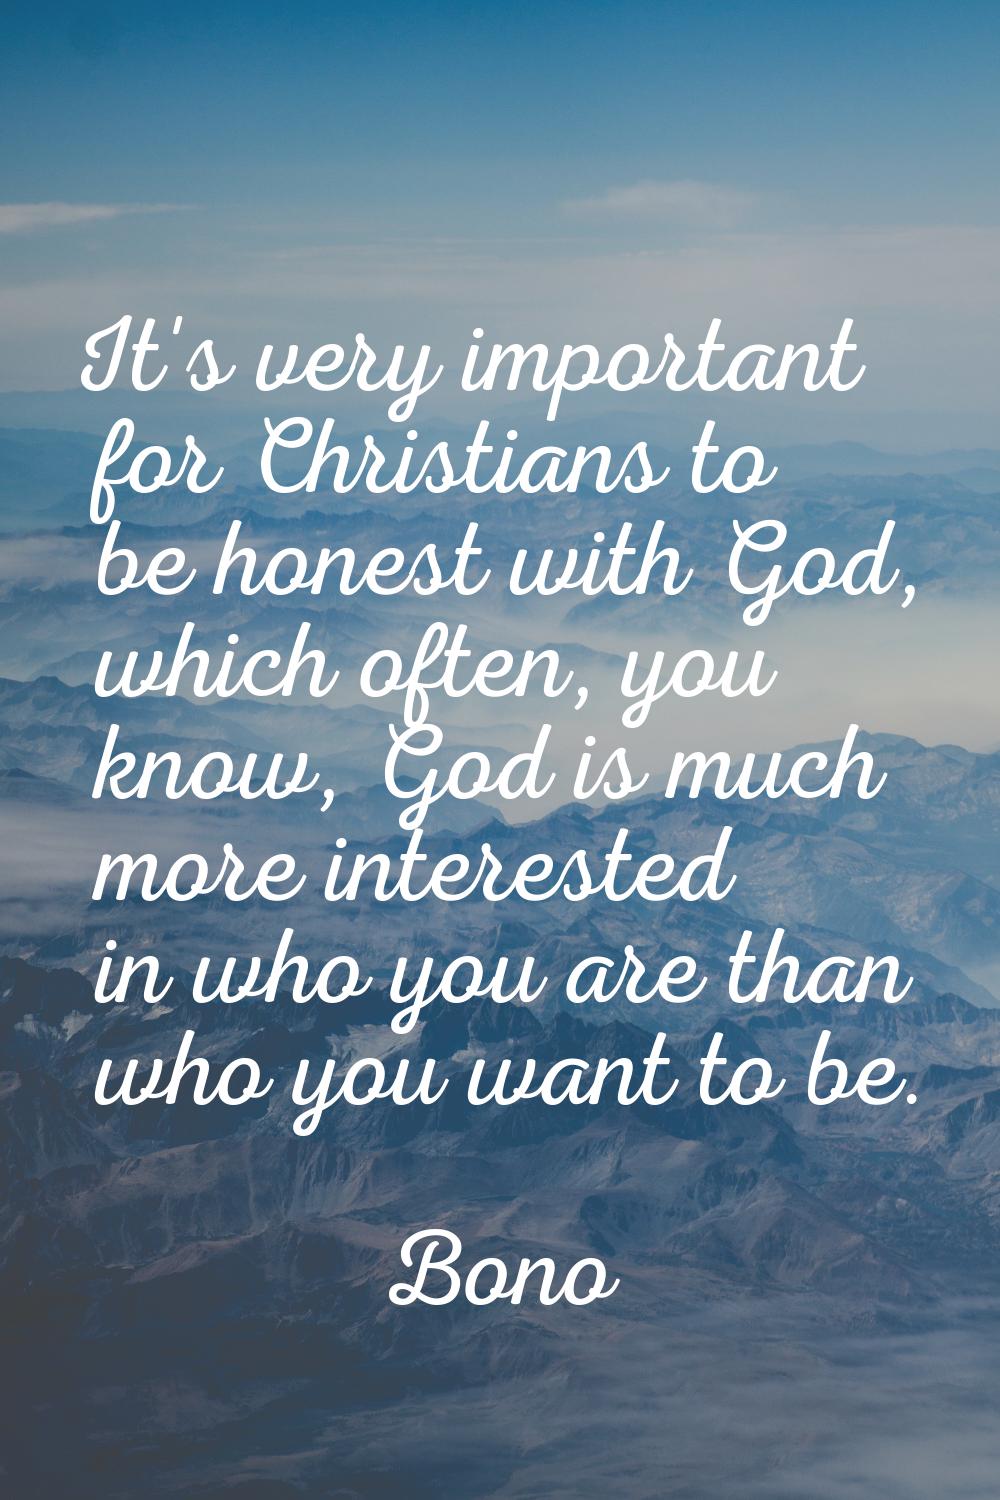 It's very important for Christians to be honest with God, which often, you know, God is much more i